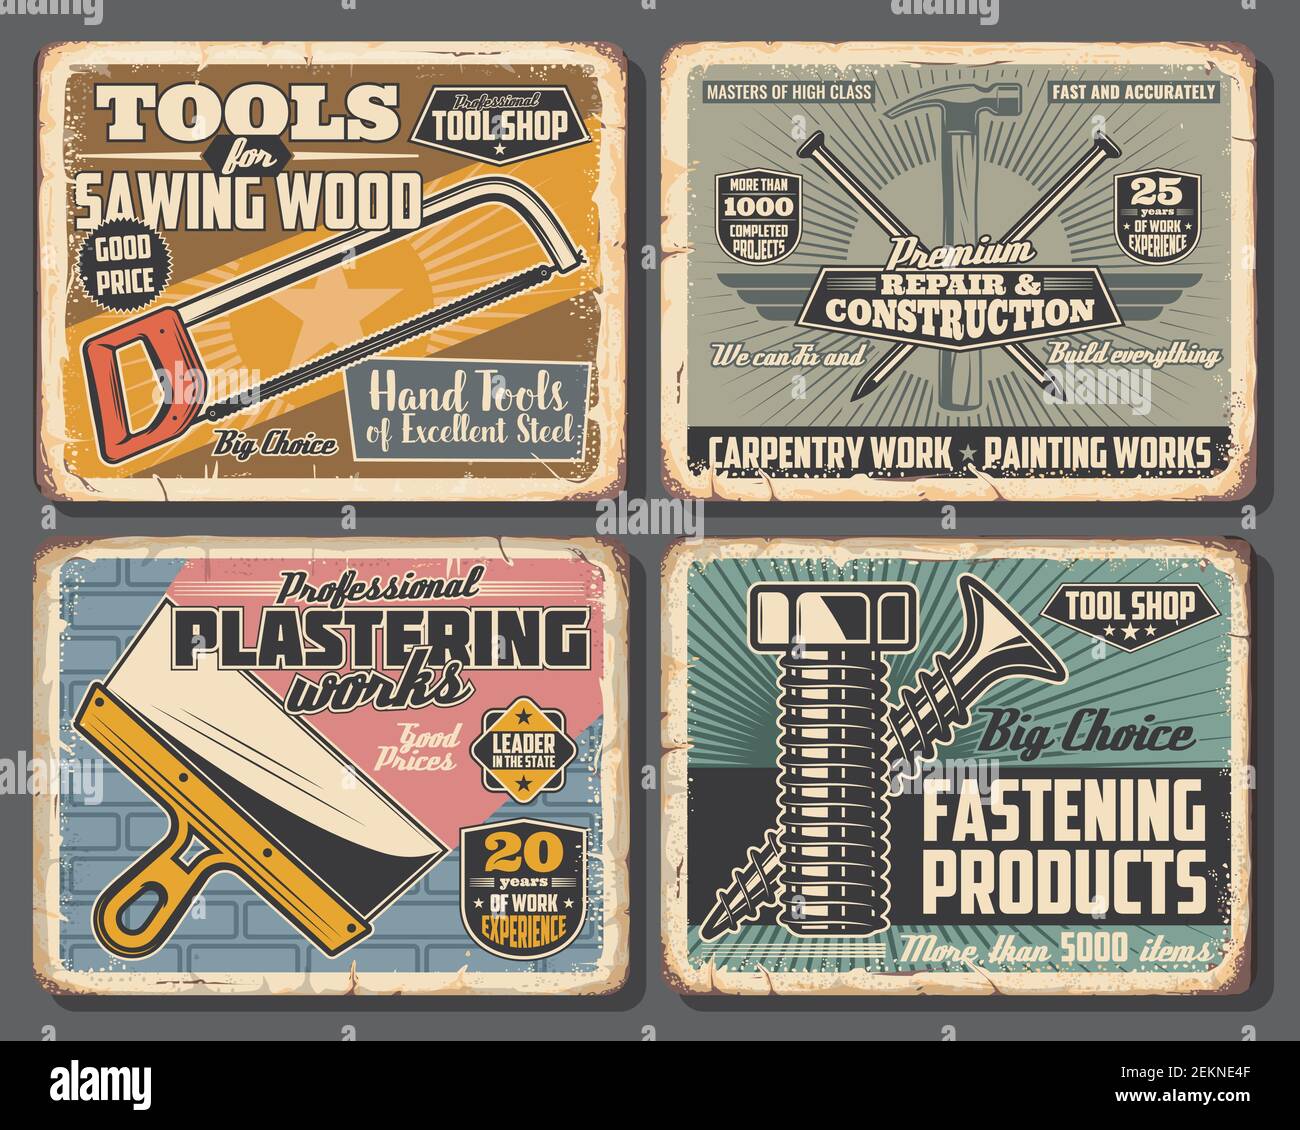 Vector fastening bolts and screws, plastering and woodwork handyman tools, hammers with nails and wood saw. Construction tools shop vintage posters, h Stock Vector